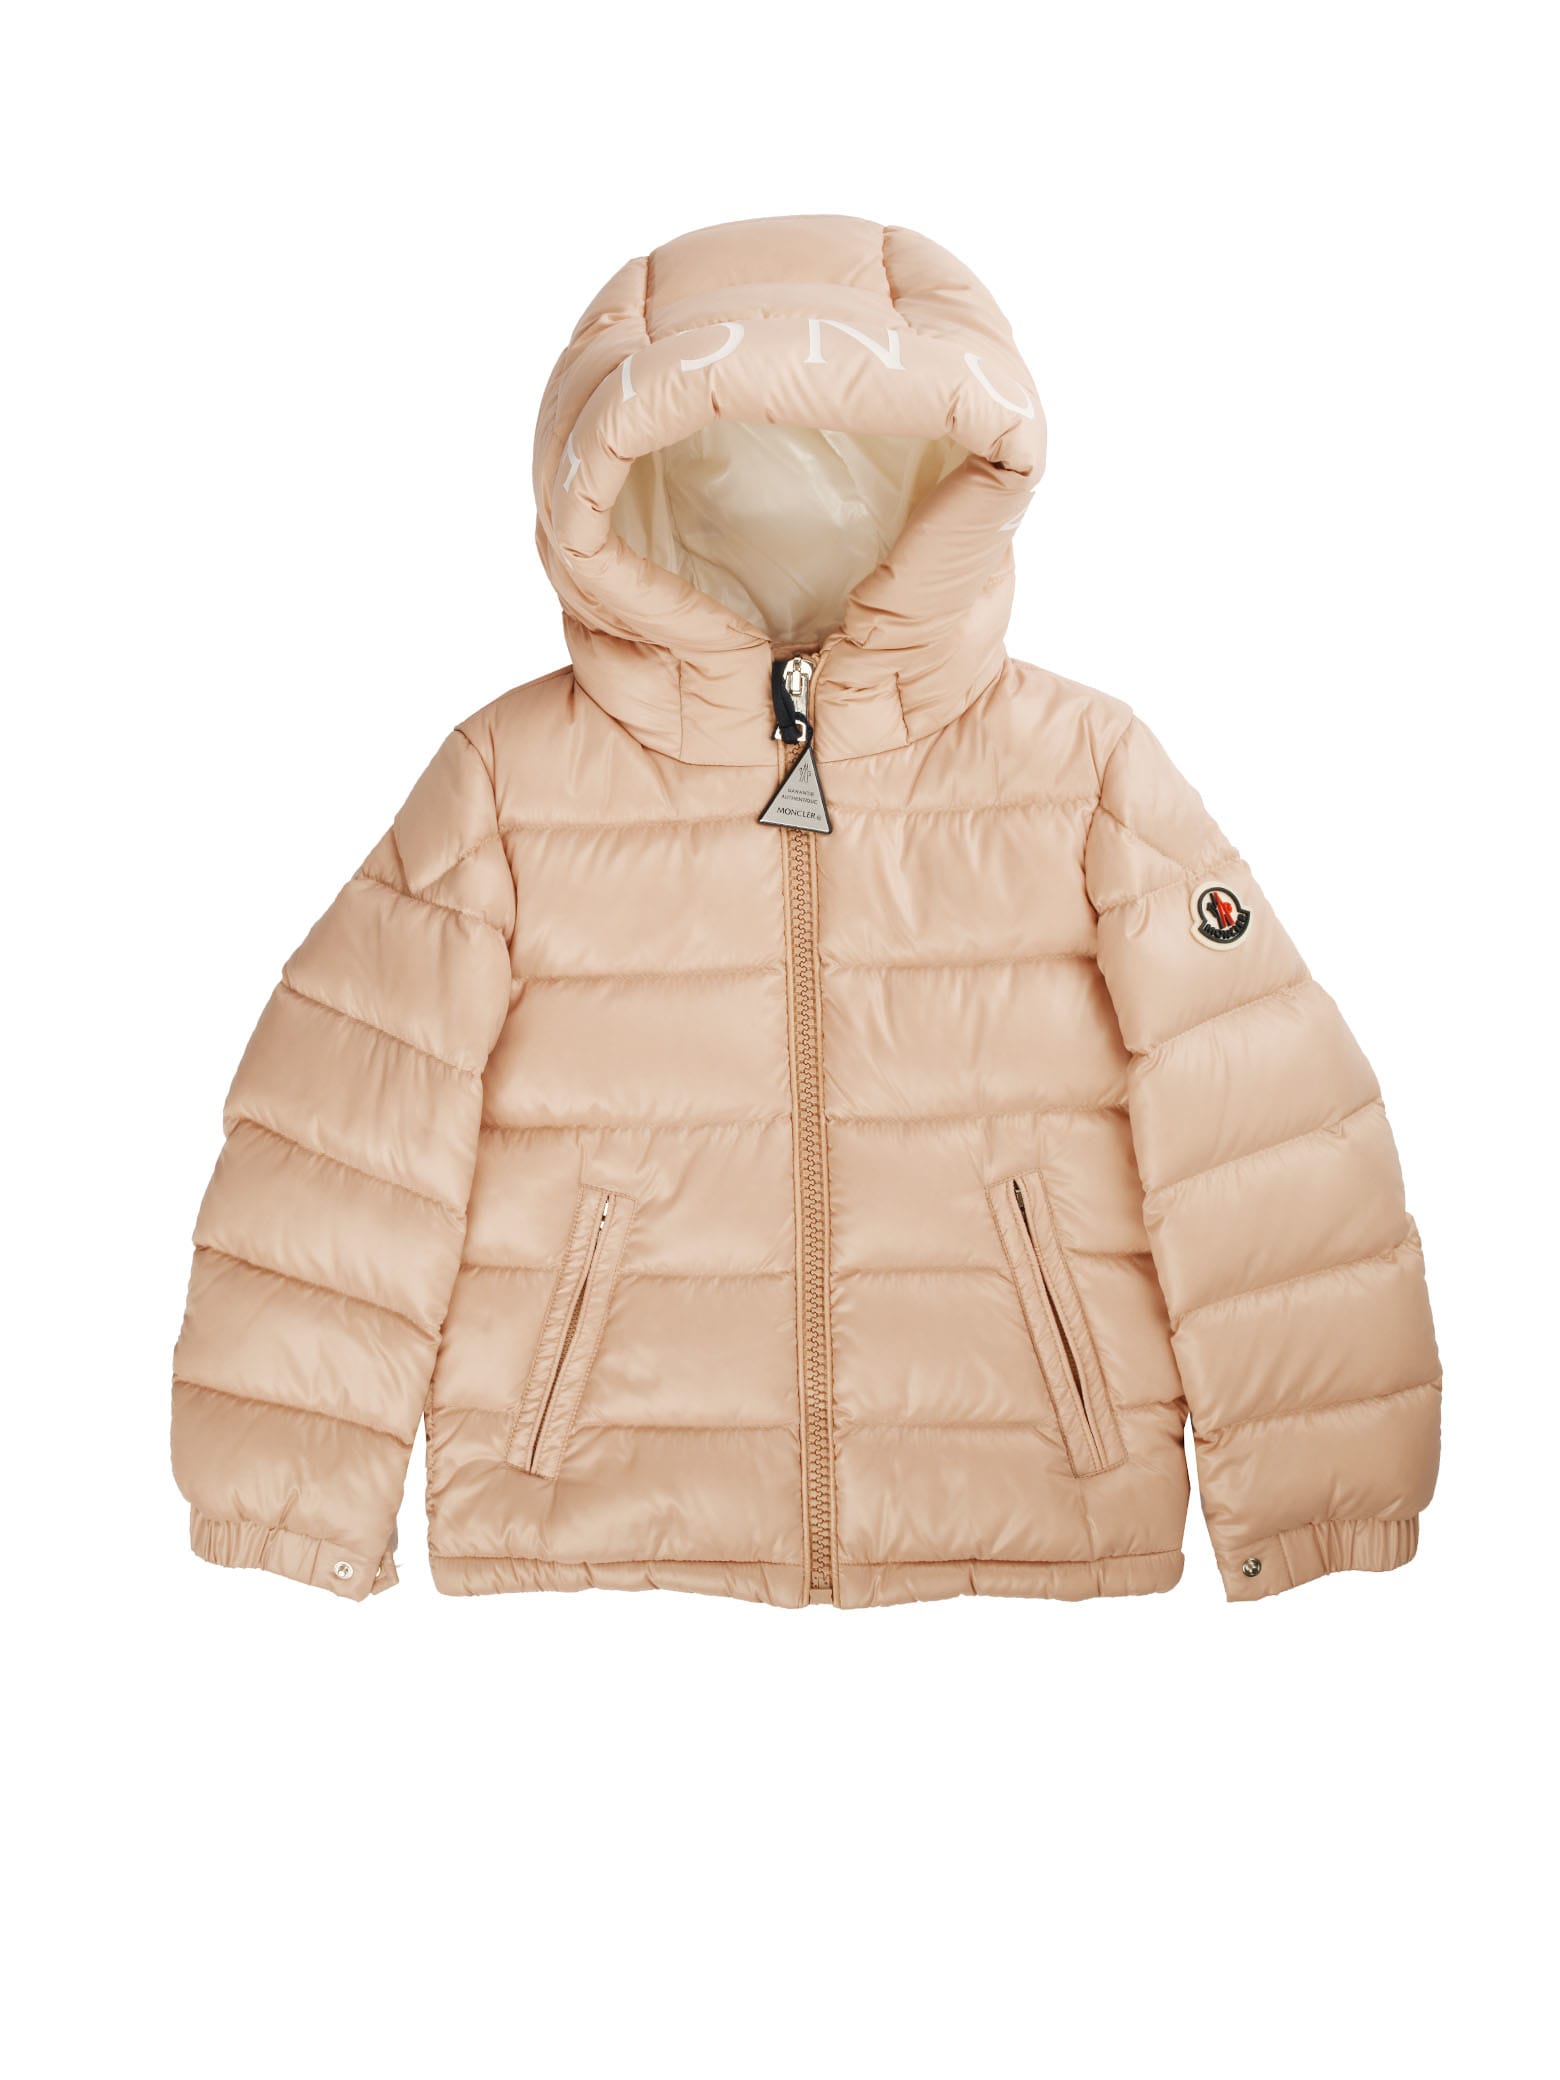 Moncler Pink Jacket With Hood Writing